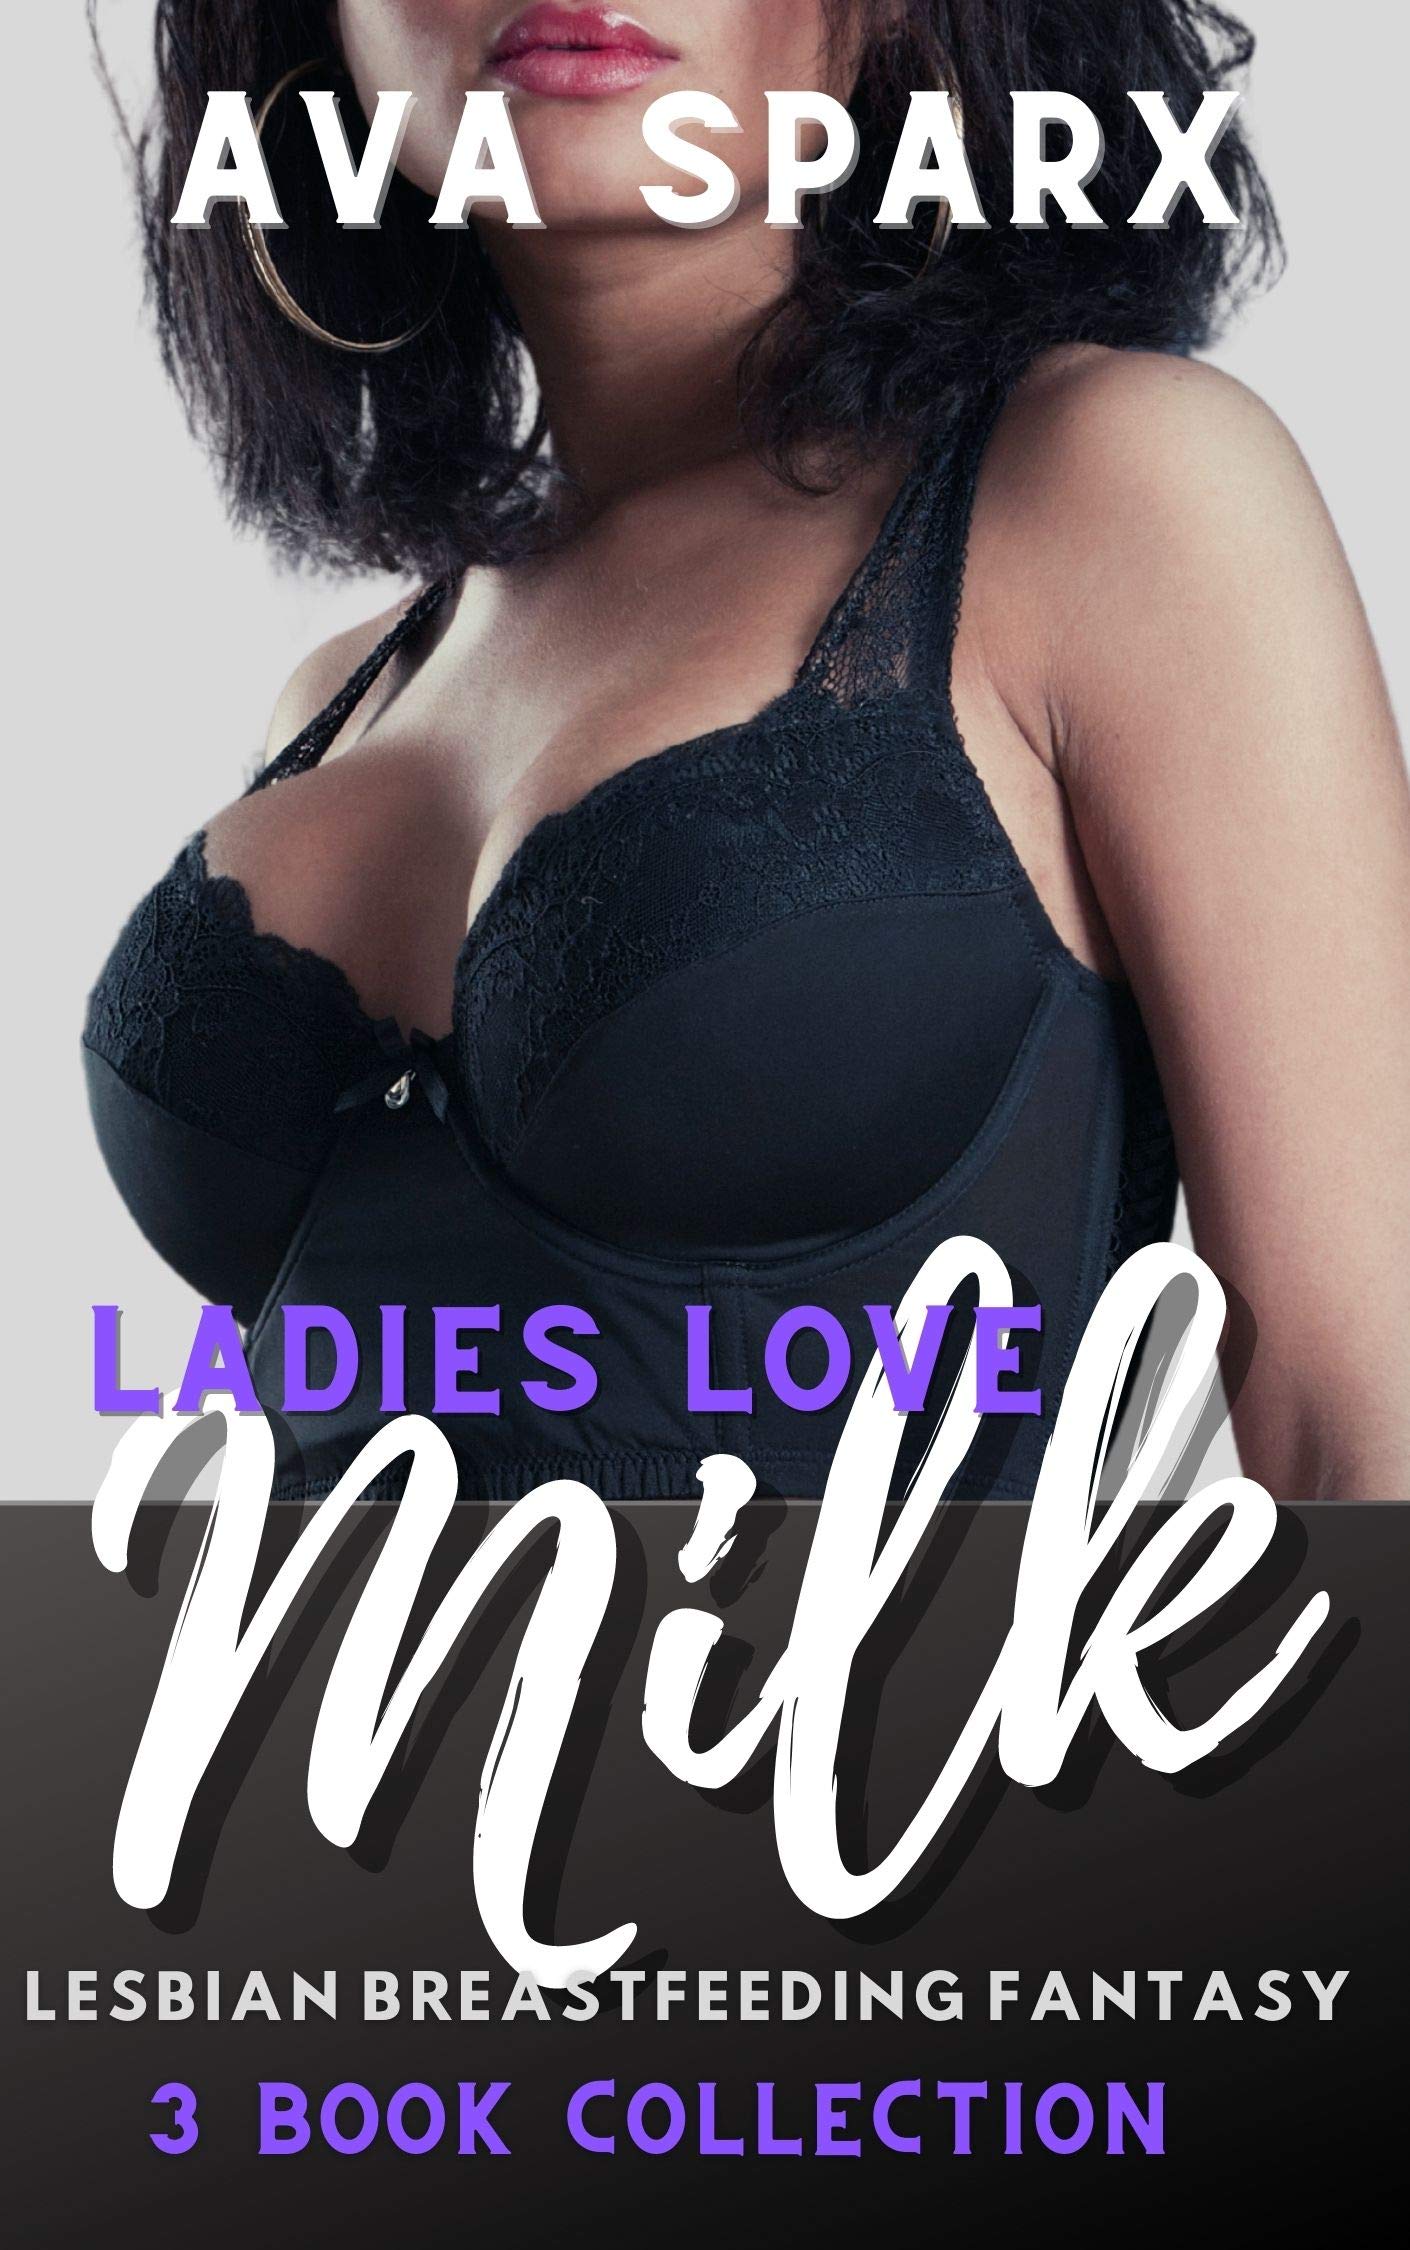 don ipock recommends breast milking lesbians pic